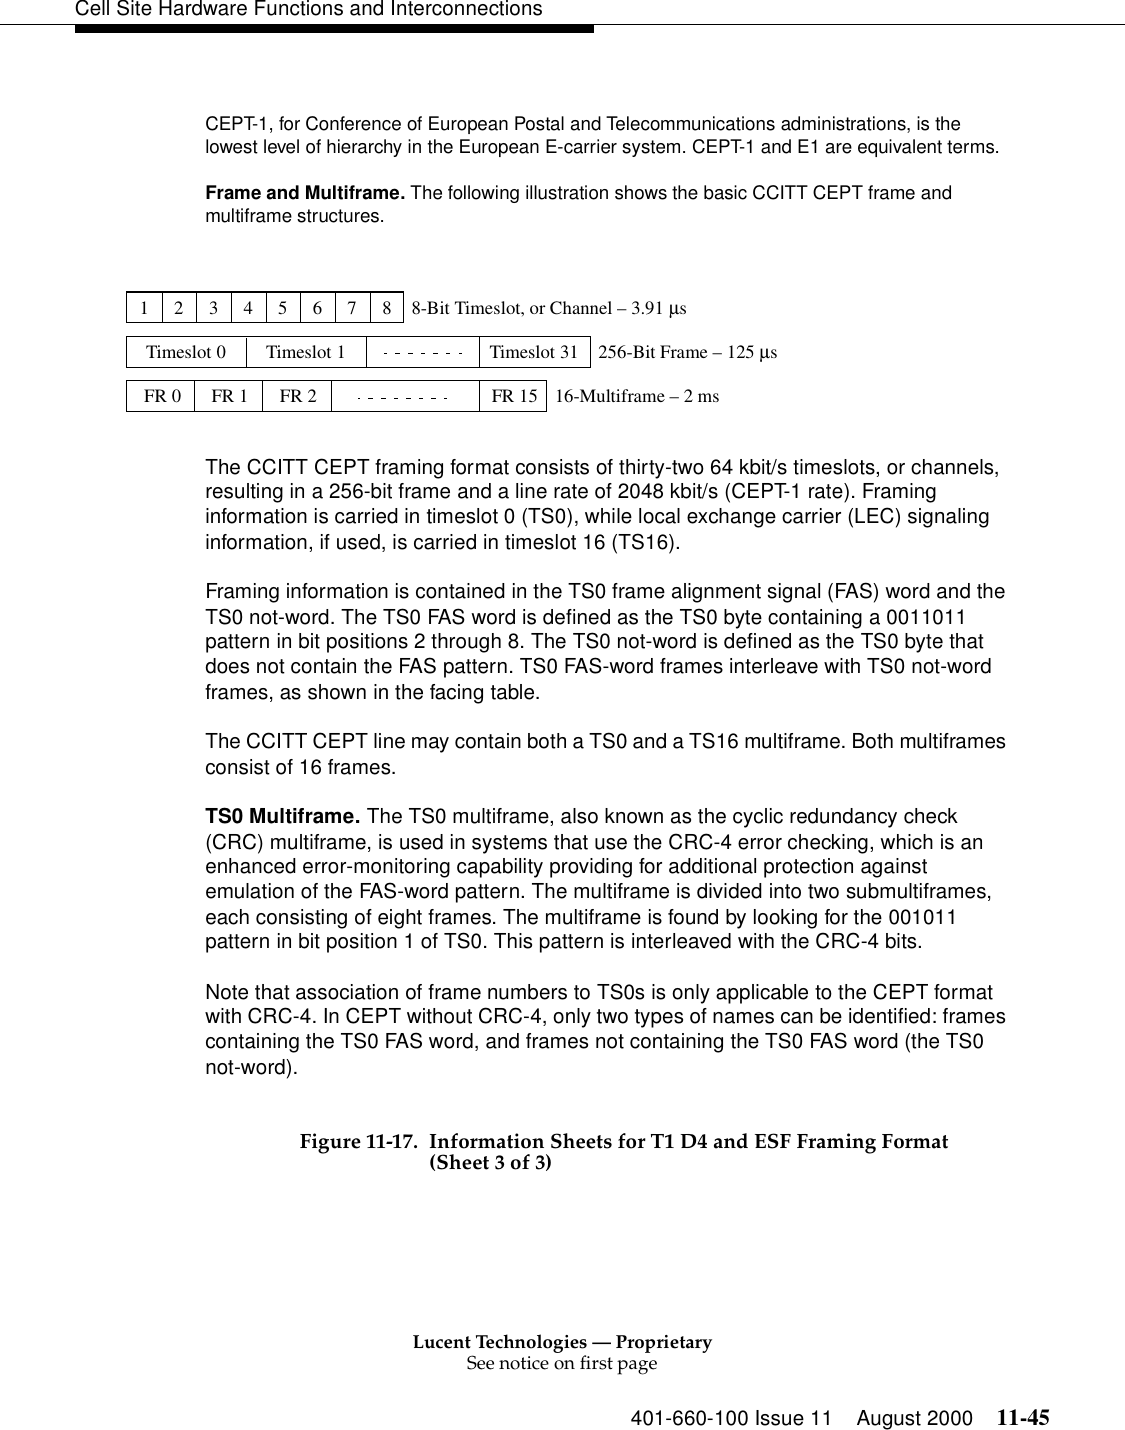 Lucent Technologies — ProprietarySee notice on first page401-660-100 Issue 11 August 2000 11-45Cell Site Hardware Functions and Interconnections Figure 11-17. Information Sheets for T1 D4 and ESF Framing Format (Sheet 3 of 3)CEPT-1, for Conference of European Postal and Telecommunications administrations, is the lowest level of hierarchy in the European E-carrier system. CEPT-1 and E1 are equivalent terms.Frame and Multiframe. The following illustration shows the basic CCITT CEPT frame and multiframe structures.The CCITT CEPT framing format consists of thirty-two 64 kbit/s timeslots, or channels, resulting in a 256-bit frame and a line rate of 2048 kbit/s (CEPT-1 rate). Framing information is carried in timeslot 0 (TS0), while local exchange carrier (LEC) signaling information, if used, is carried in timeslot 16 (TS16).Framing information is contained in the TS0 frame alignment signal (FAS) word and the TS0 not-word. The TS0 FAS word is defined as the TS0 byte containing a 0011011 pattern in bit positions 2 through 8. The TS0 not-word is defined as the TS0 byte that does not contain the FAS pattern. TS0 FAS-word frames interleave with TS0 not-word frames, as shown in the facing table.The CCITT CEPT line may contain both a TS0 and a TS16 multiframe. Both multiframes consist of 16 frames.TS0 Multiframe. The TS0 multiframe, also known as the cyclic redundancy check (CRC) multiframe, is used in systems that use the CRC-4 error checking, which is an enhanced error-monitoring capability providing for additional protection against emulation of the FAS-word pattern. The multiframe is divided into two submultiframes, each consisting of eight frames. The multiframe is found by looking for the 001011 pattern in bit position 1 of TS0. This pattern is interleaved with the CRC-4 bits.Note that association of frame numbers to TS0s is only applicable to the CEPT format with CRC-4. In CEPT without CRC-4, only two types of names can be identified: frames containing the TS0 FAS word, and frames not containing the TS0 FAS word (the TS0 not-word).12345678Timeslot 0 Timeslot 1 Timeslot 31FR 0 FR 1 FR 2 FR 15256-Bit Frame – 125 µs8-Bit Timeslot, or Channel – 3.91 µs16-Multiframe – 2 ms